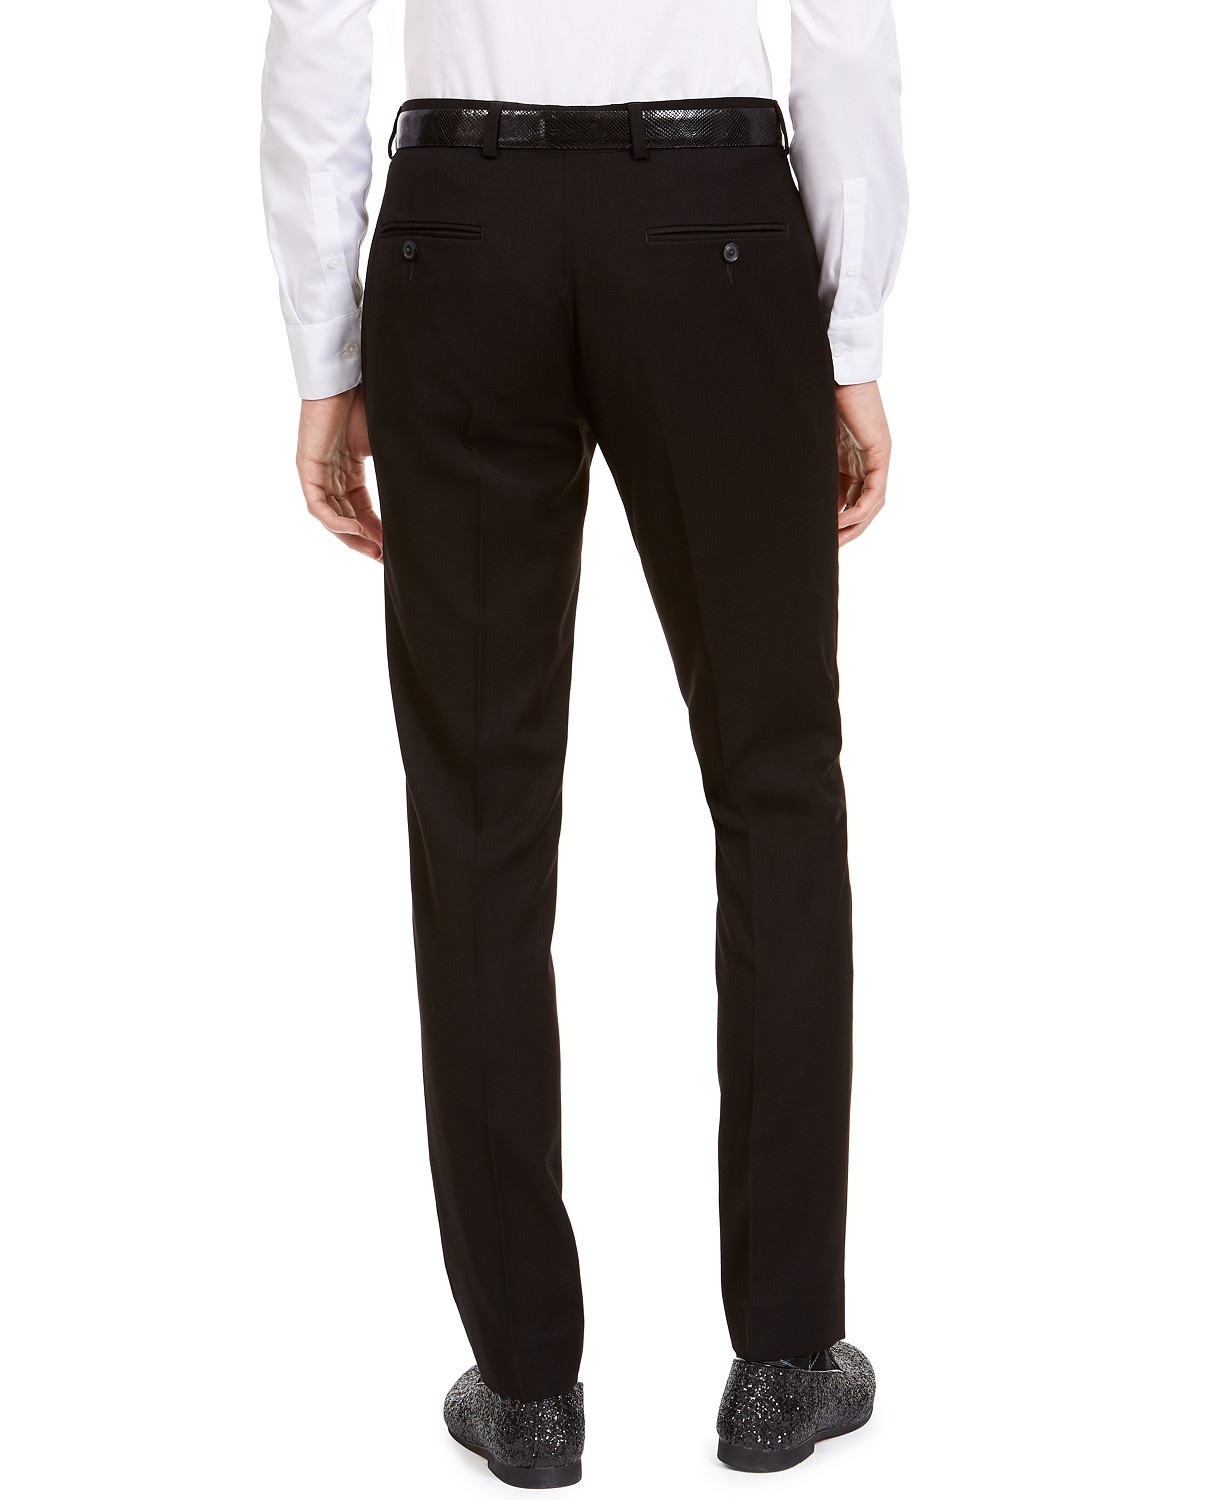 woocommerce-673321-2209615.cloudwaysapps.com-billy-london-mens-black-slim-fit-performance-stretch-tonal-houndstooth-tuxedo-suit